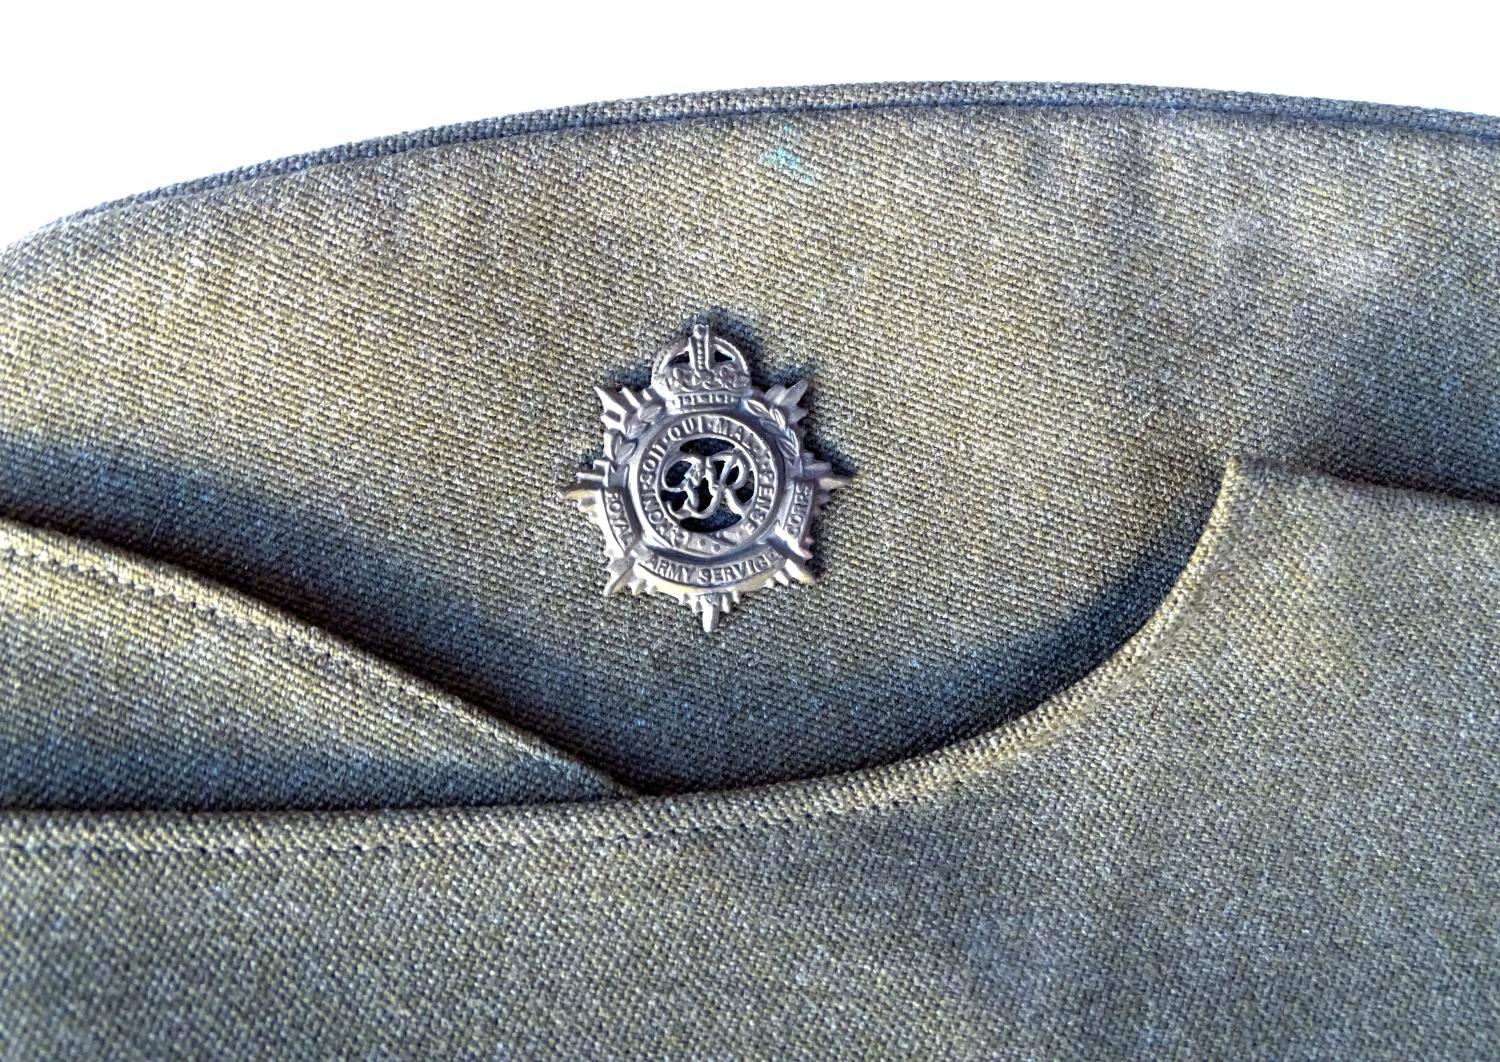 Field service cap  Royal Army Service Corps. Fabrication tailleur.